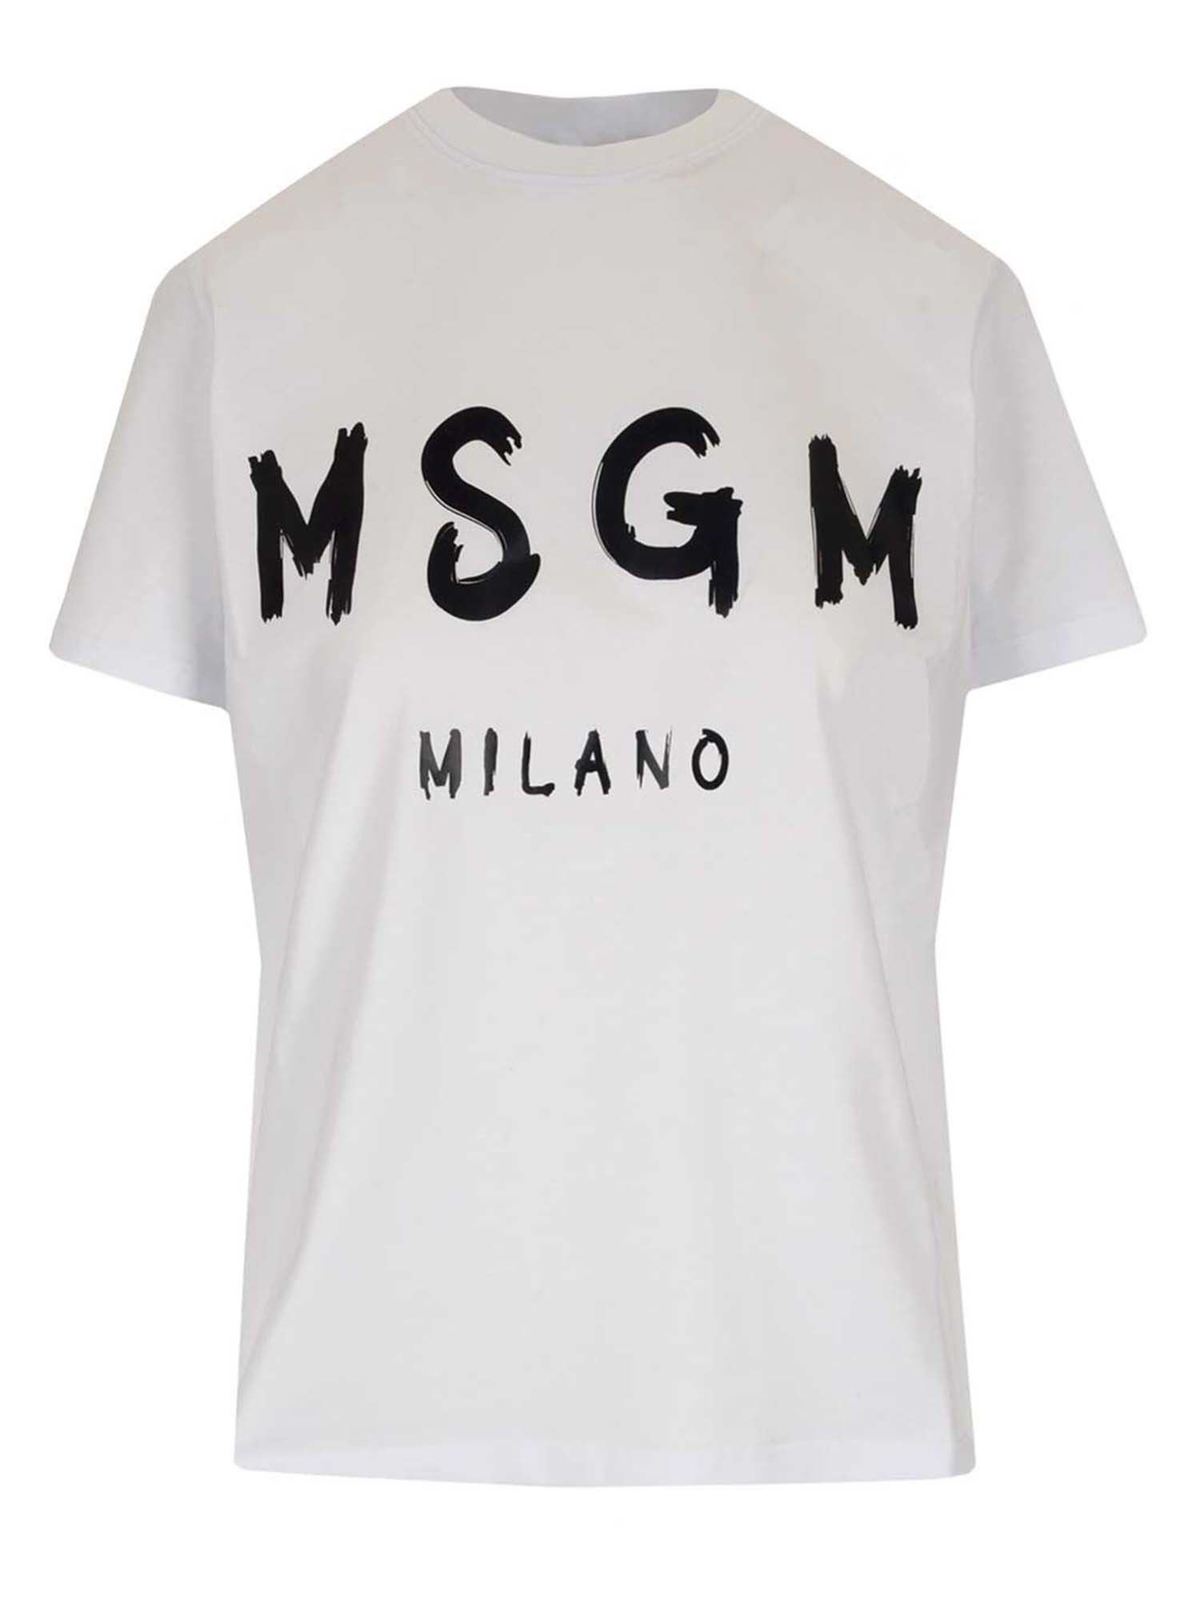 Msgm Logo T-shirt In White And Black